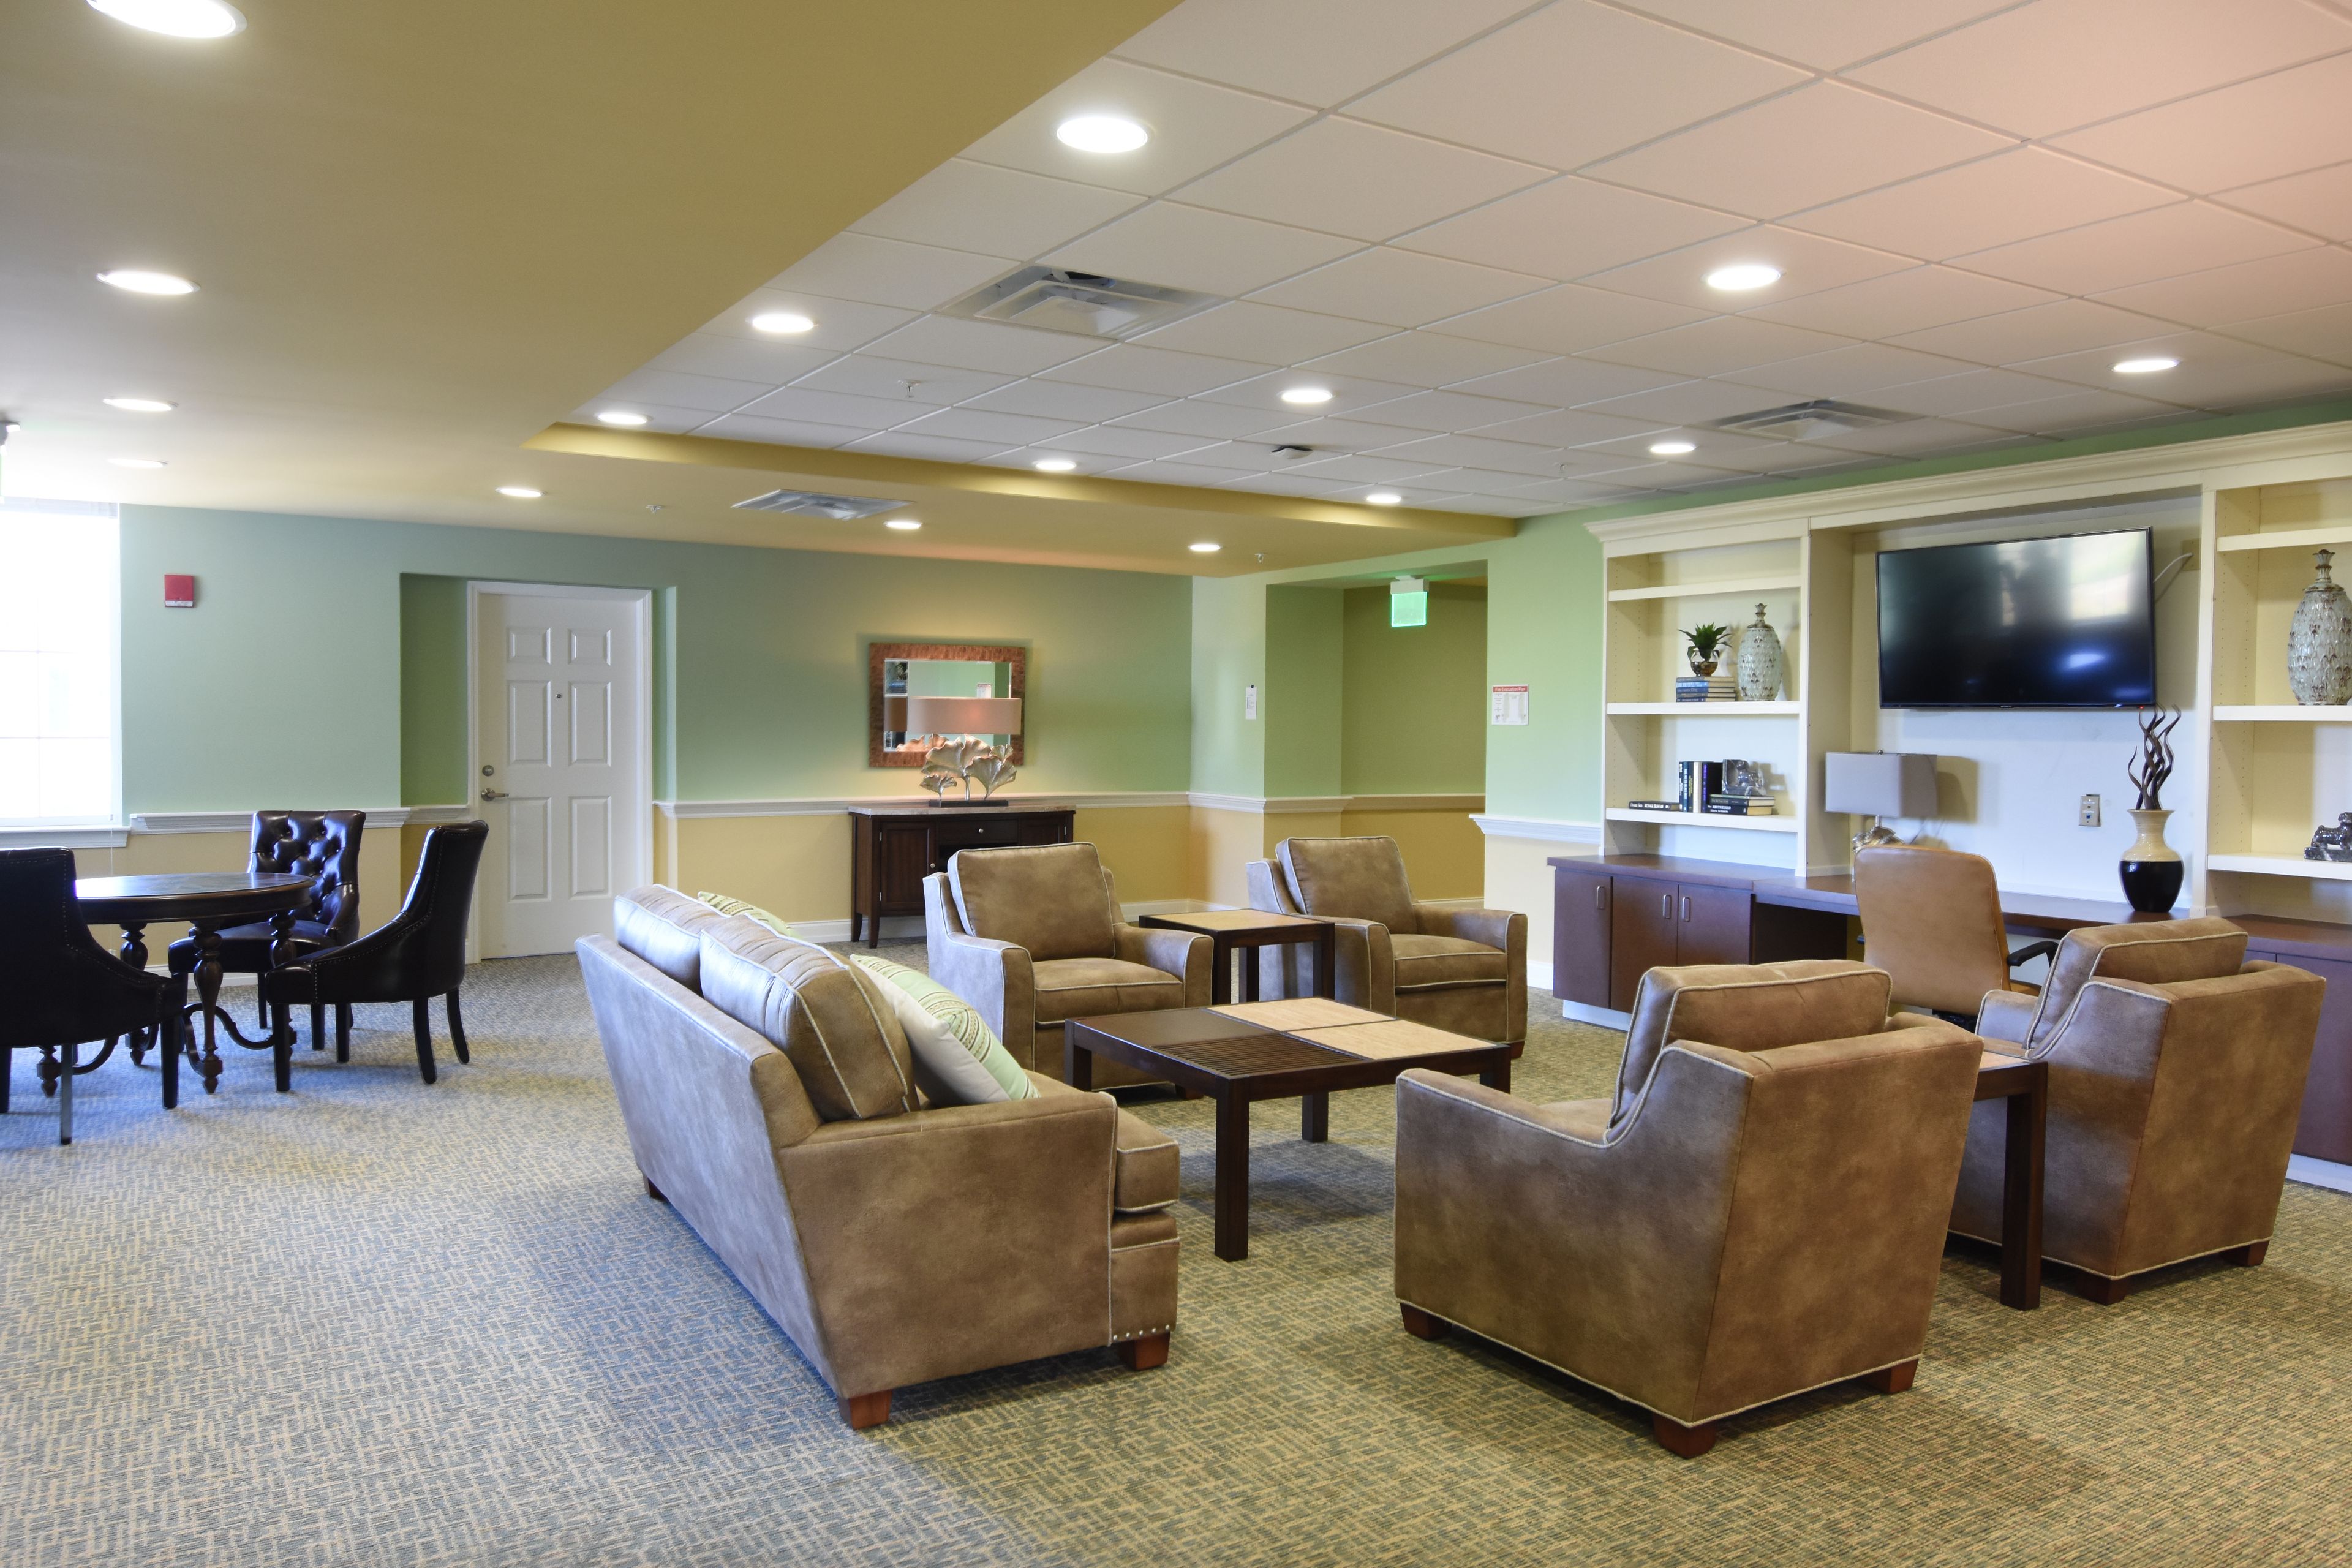 Senior living room interior at Silver Creek with modern furniture, electronics, and decor.